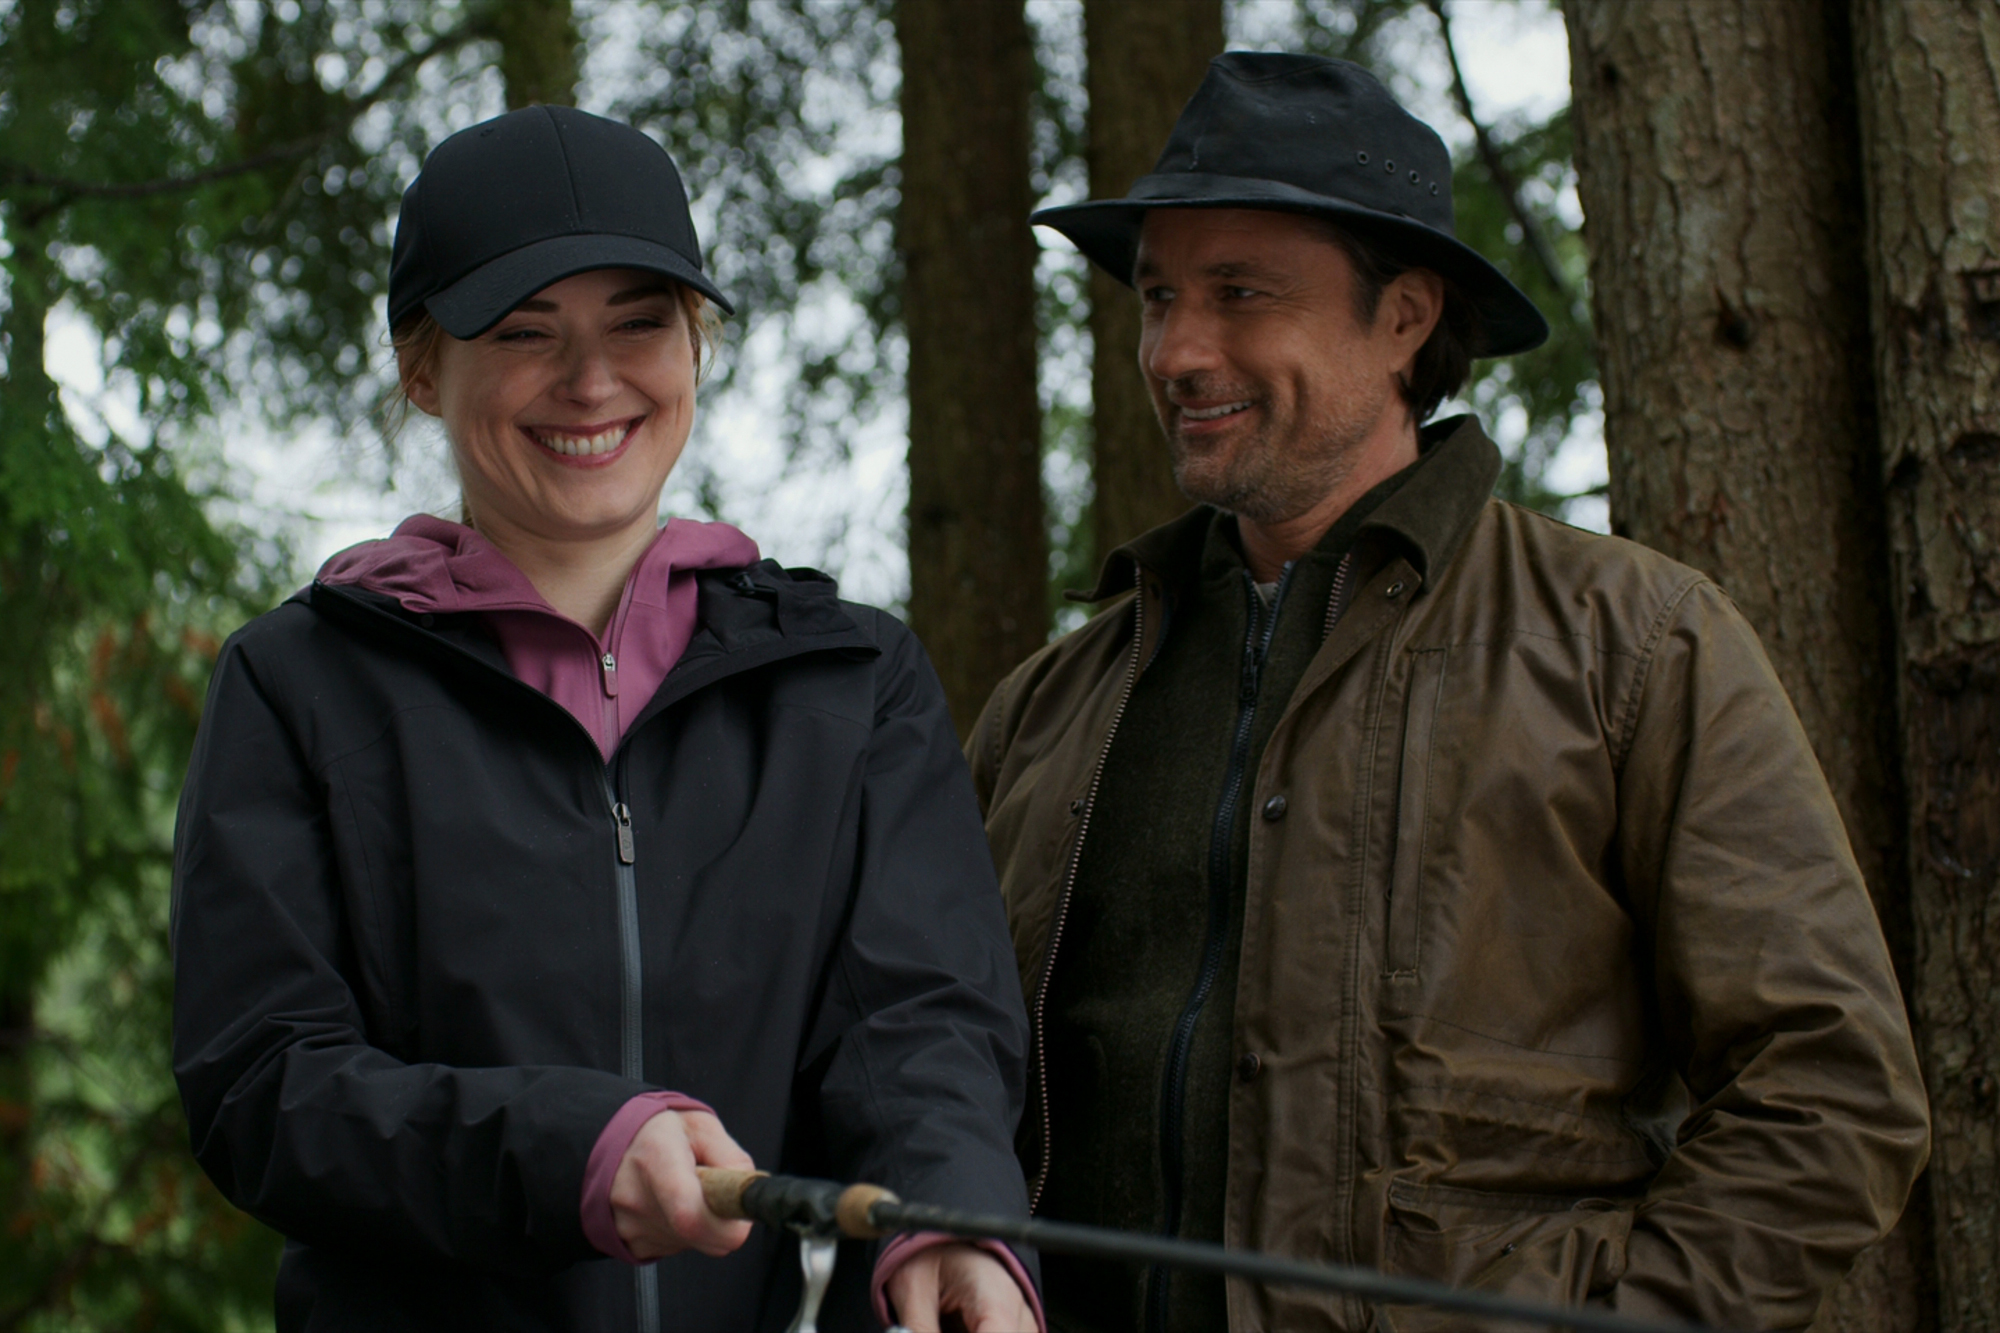 Alexandra Breckenridge as Melinda Monroe and Martin Henderson as Jack Sheridan in 'Virgin River' on Netflix. She's wearing a black hoodie and cap and smiling while holding a fishing rod. He's looking at her and smiling.